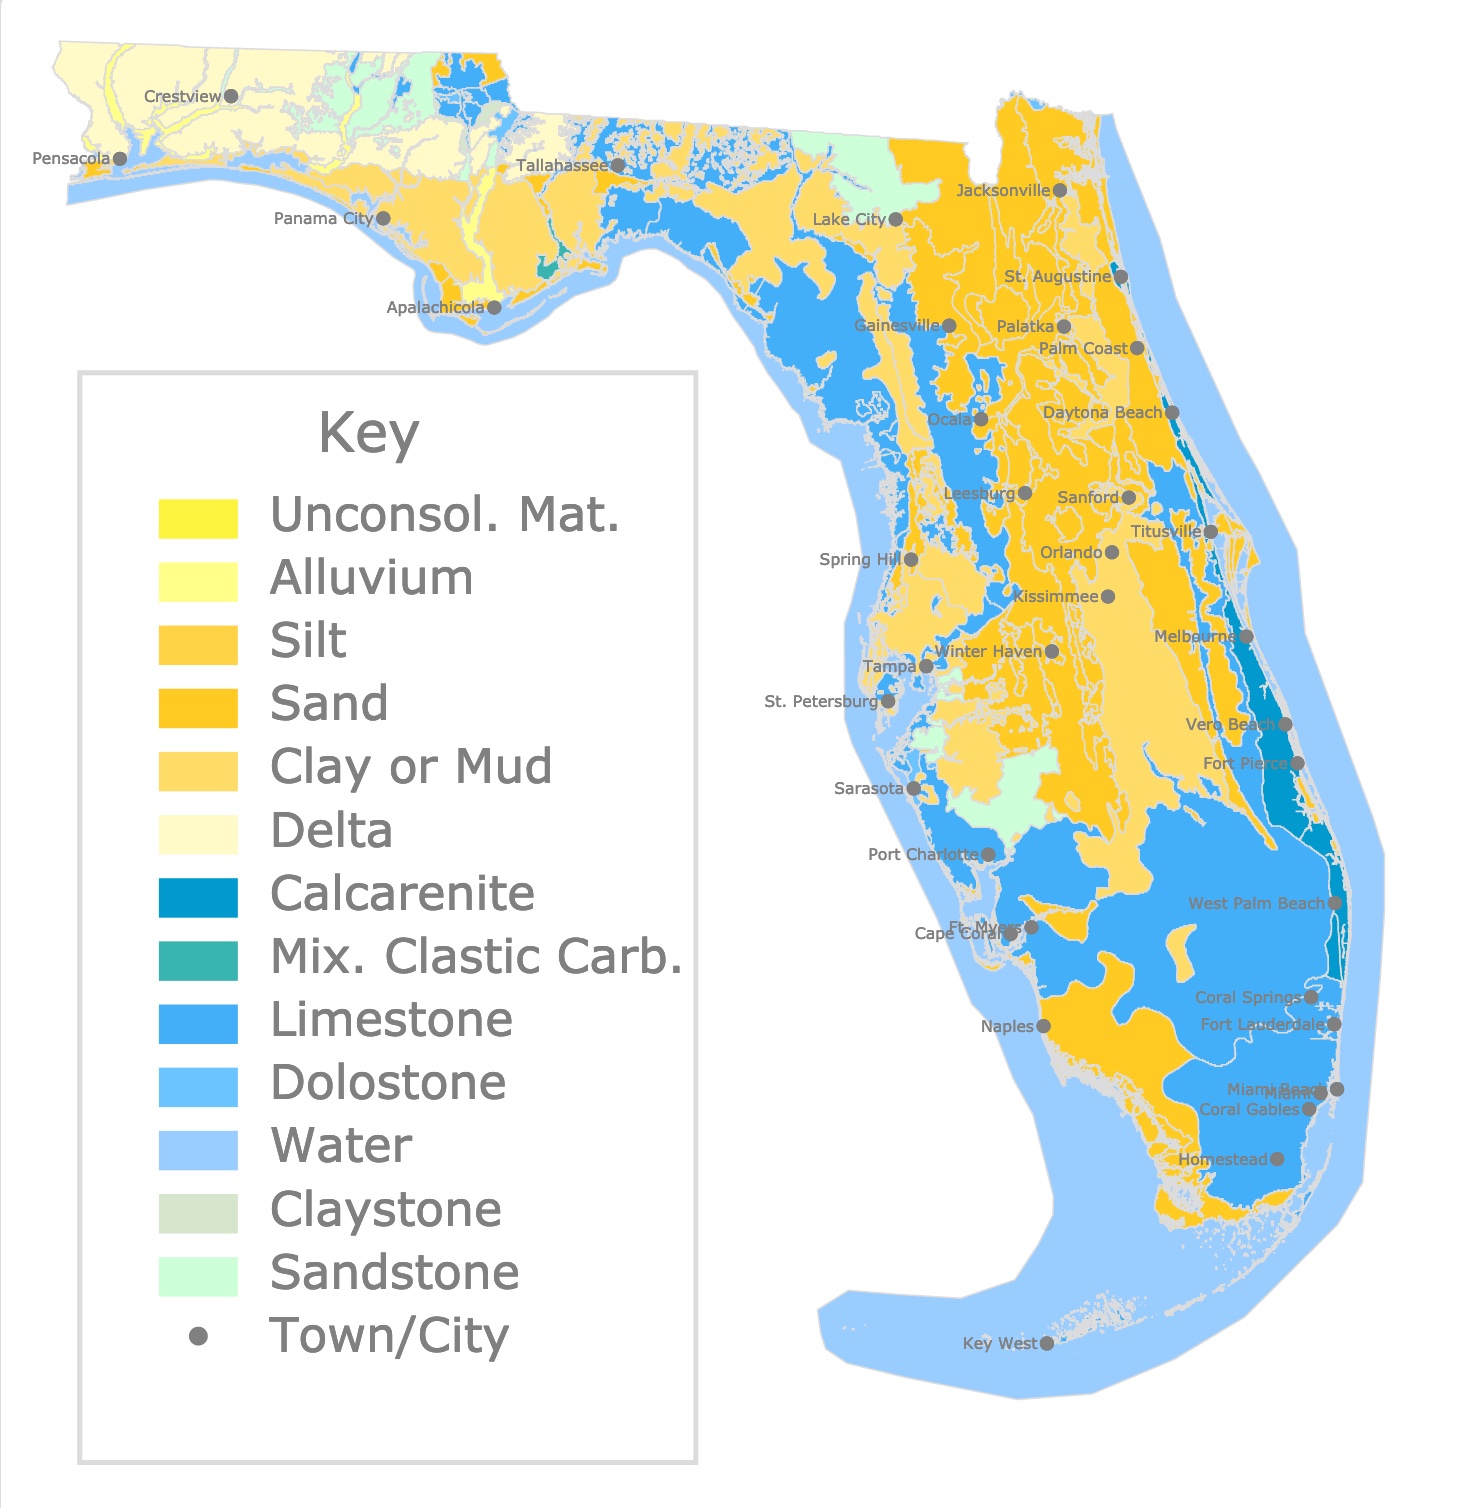 Interactive map of Florida Geologic formations